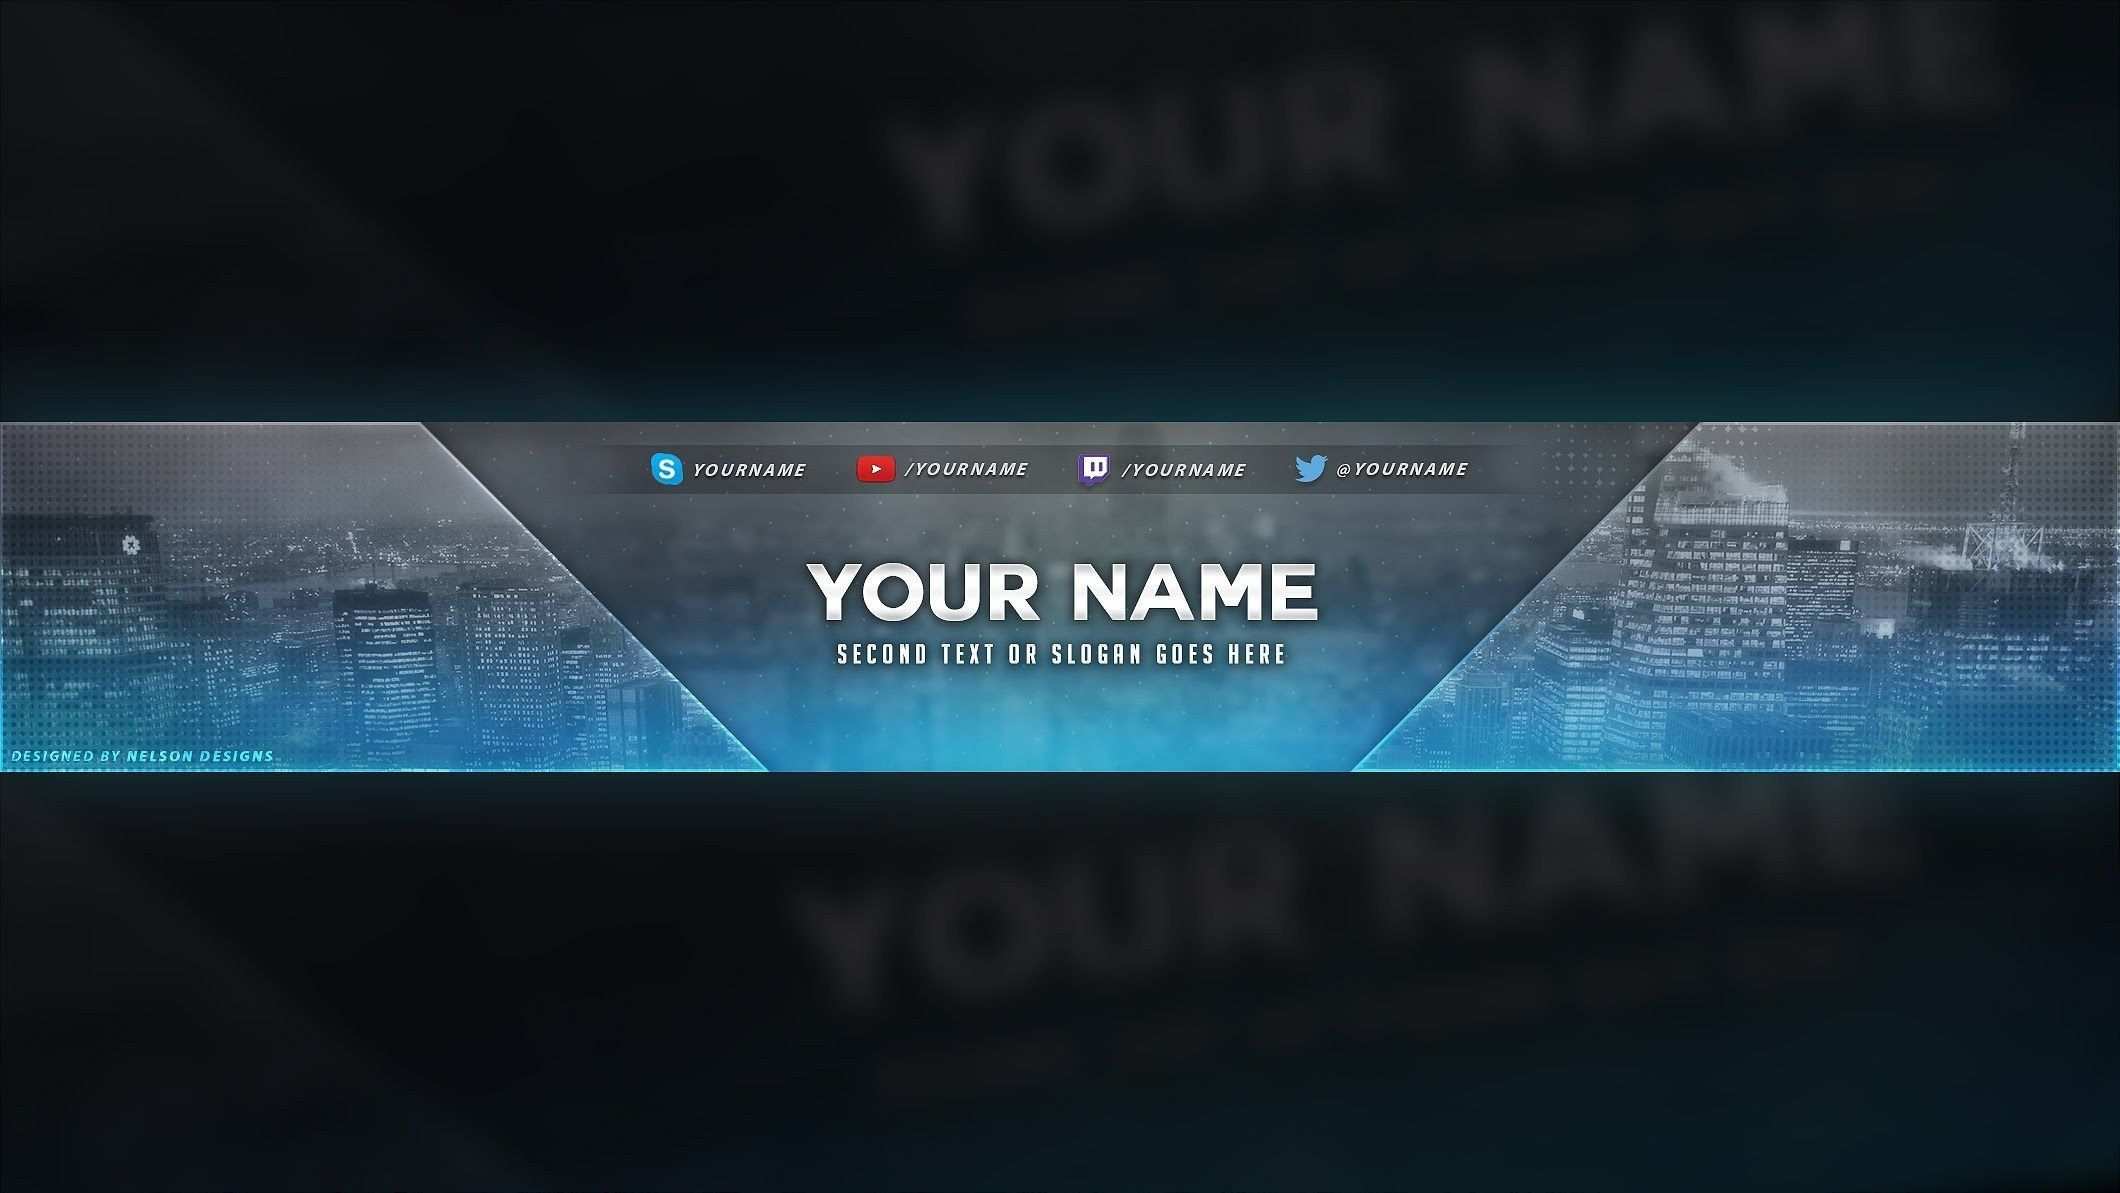 4 Free Youtube Banner Psd Template Designs Social Media